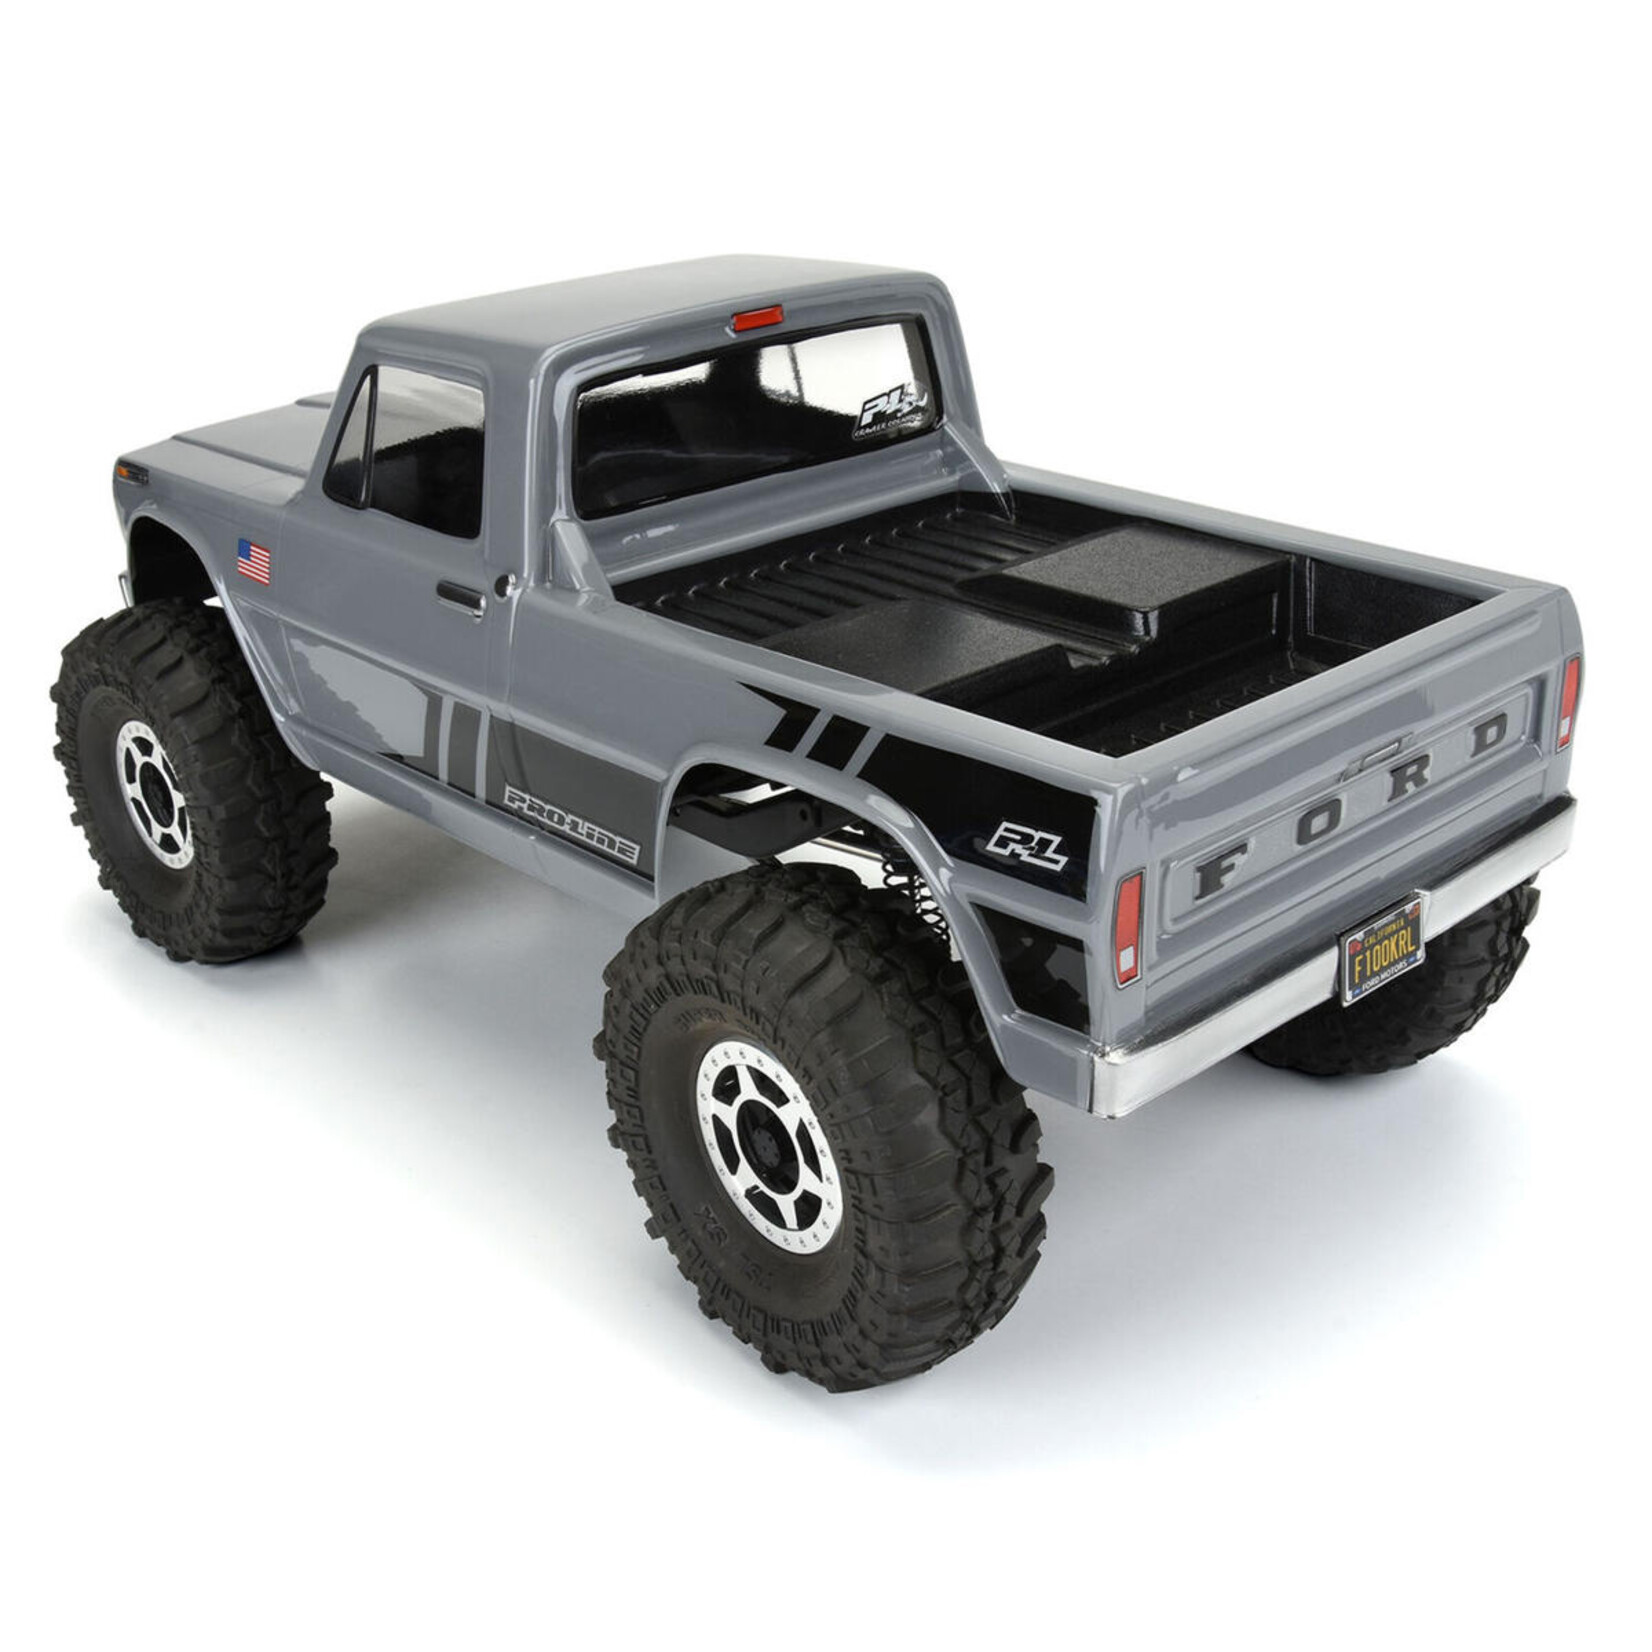 Pro-Line Pro-Line 1967 Ford F-100 12.3" Rock Crawler Body (Clear) #3613-00